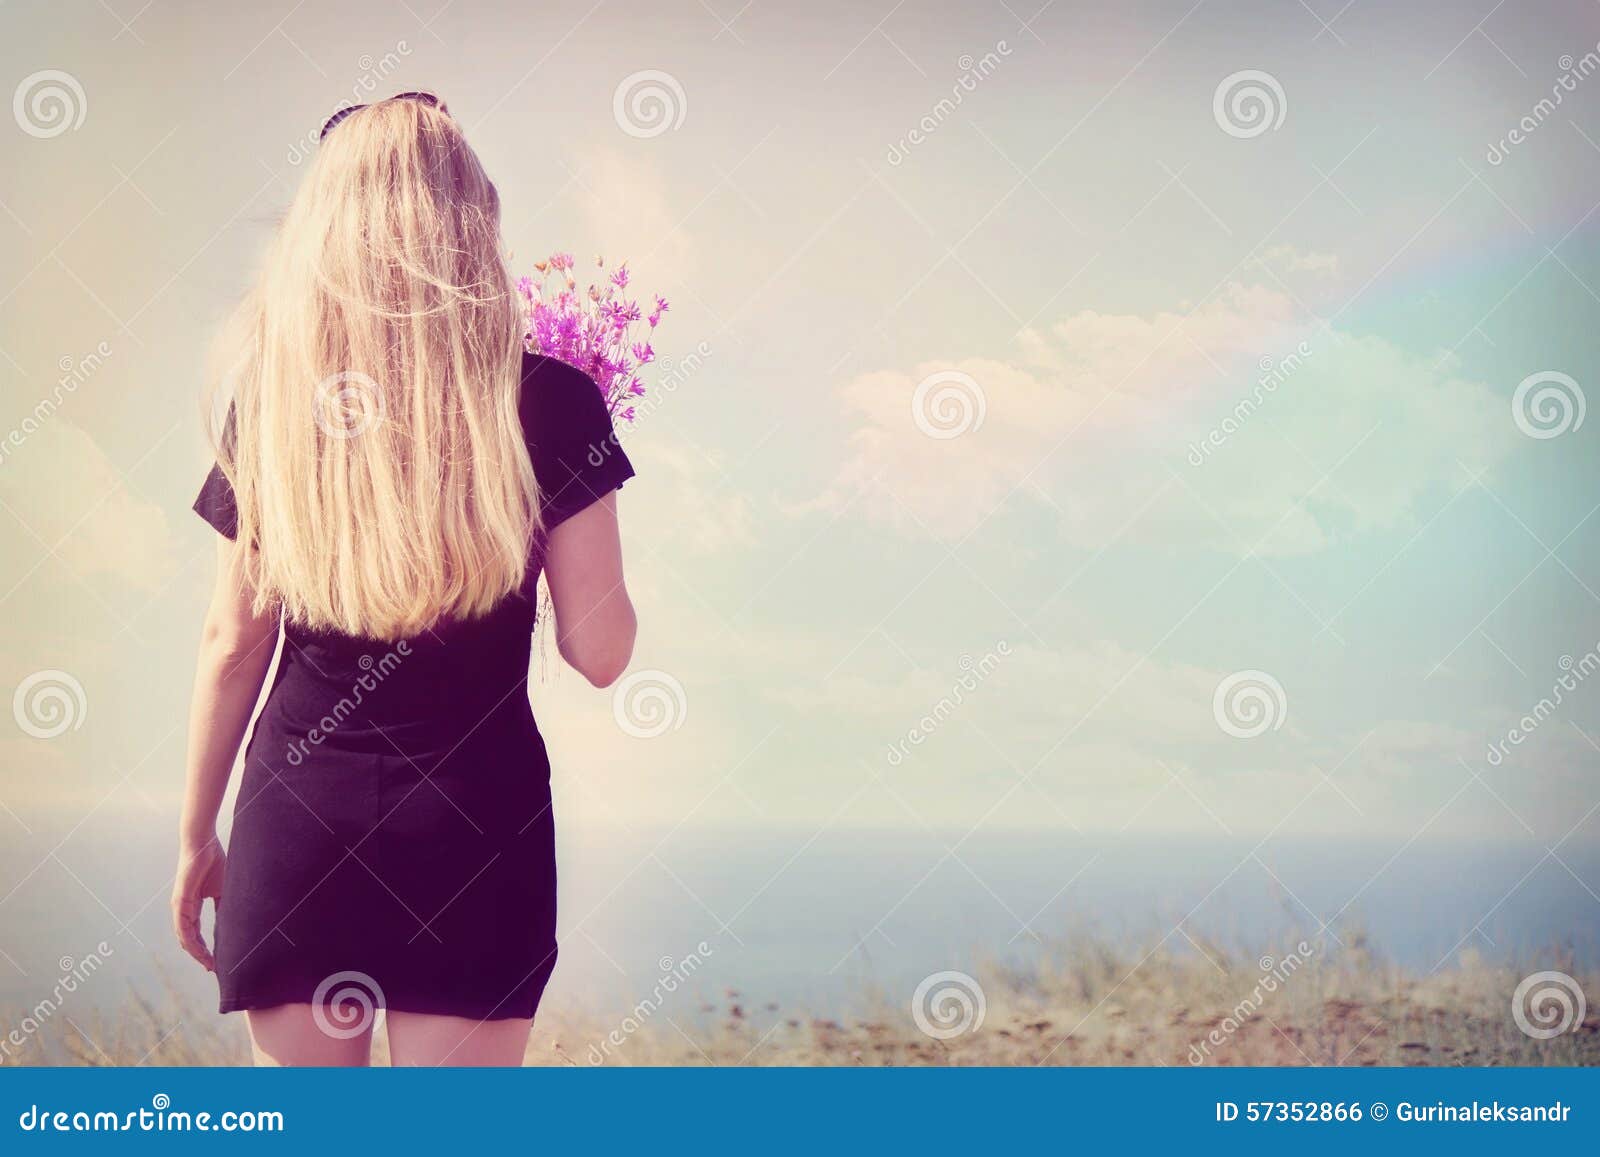 Back pose of smiling girl pointing Stock Photo by ©imagerymajestic 1672459